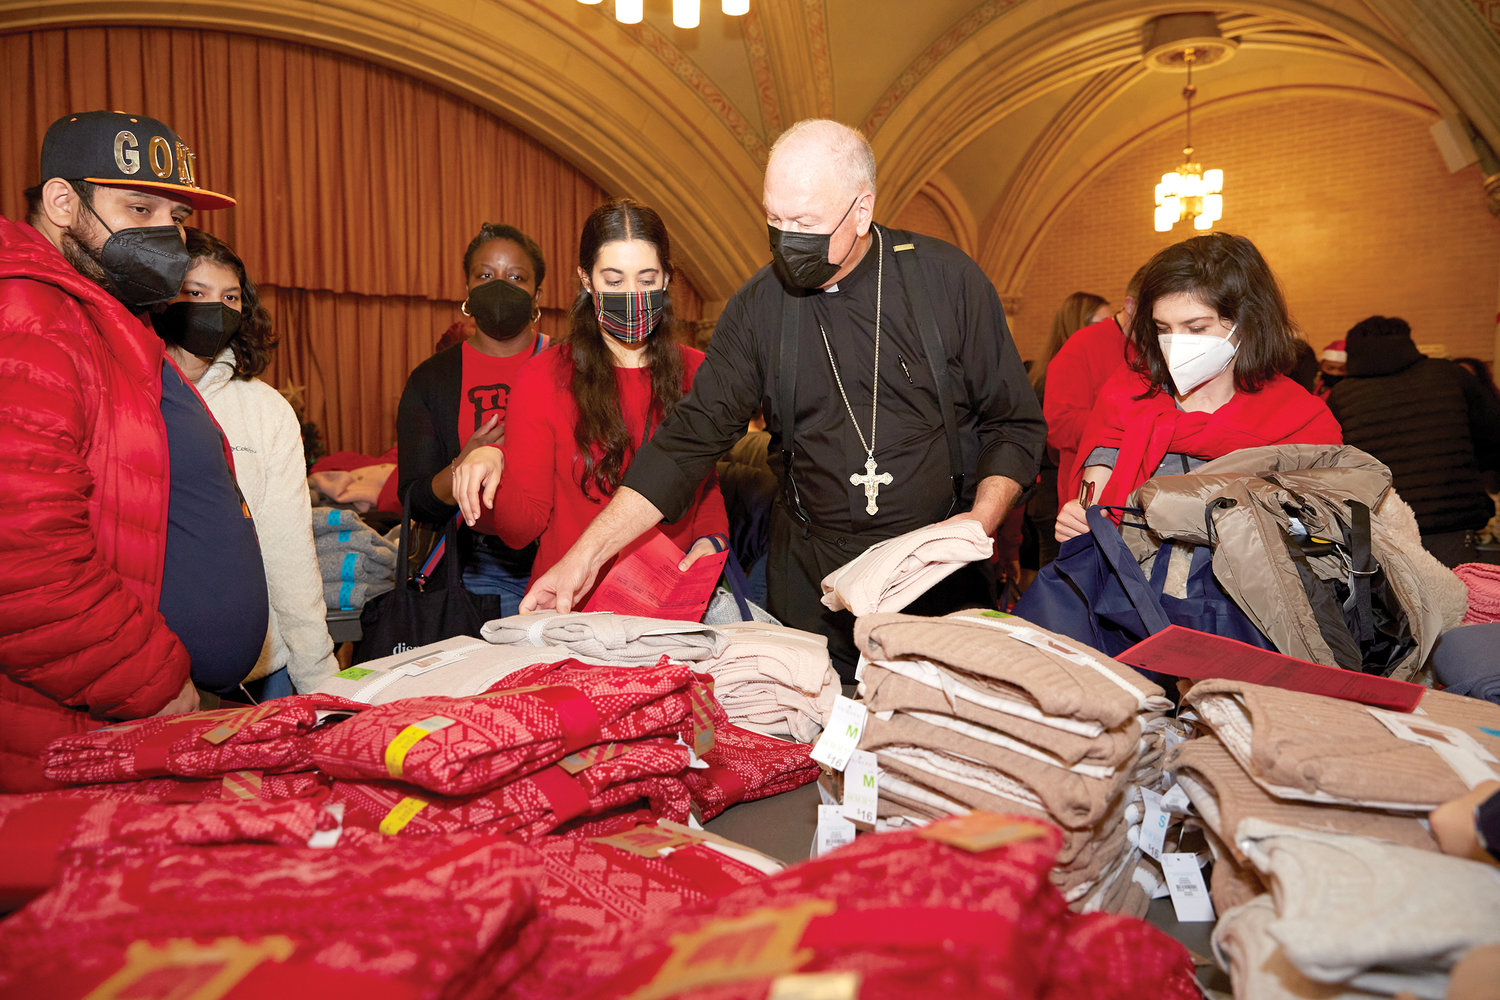 Cardinal Dolan hosts the annual St. Nicholas Project Volunteer Shopping Day in Manhattan along with archdiocesan Catholic Charities. Held Dec. 11 in Our Saviour Church on Park Avenue, the event was a boutique of winter clothes and other goods for 100 families in need in the New York area; volunteers shopped on their behalf.